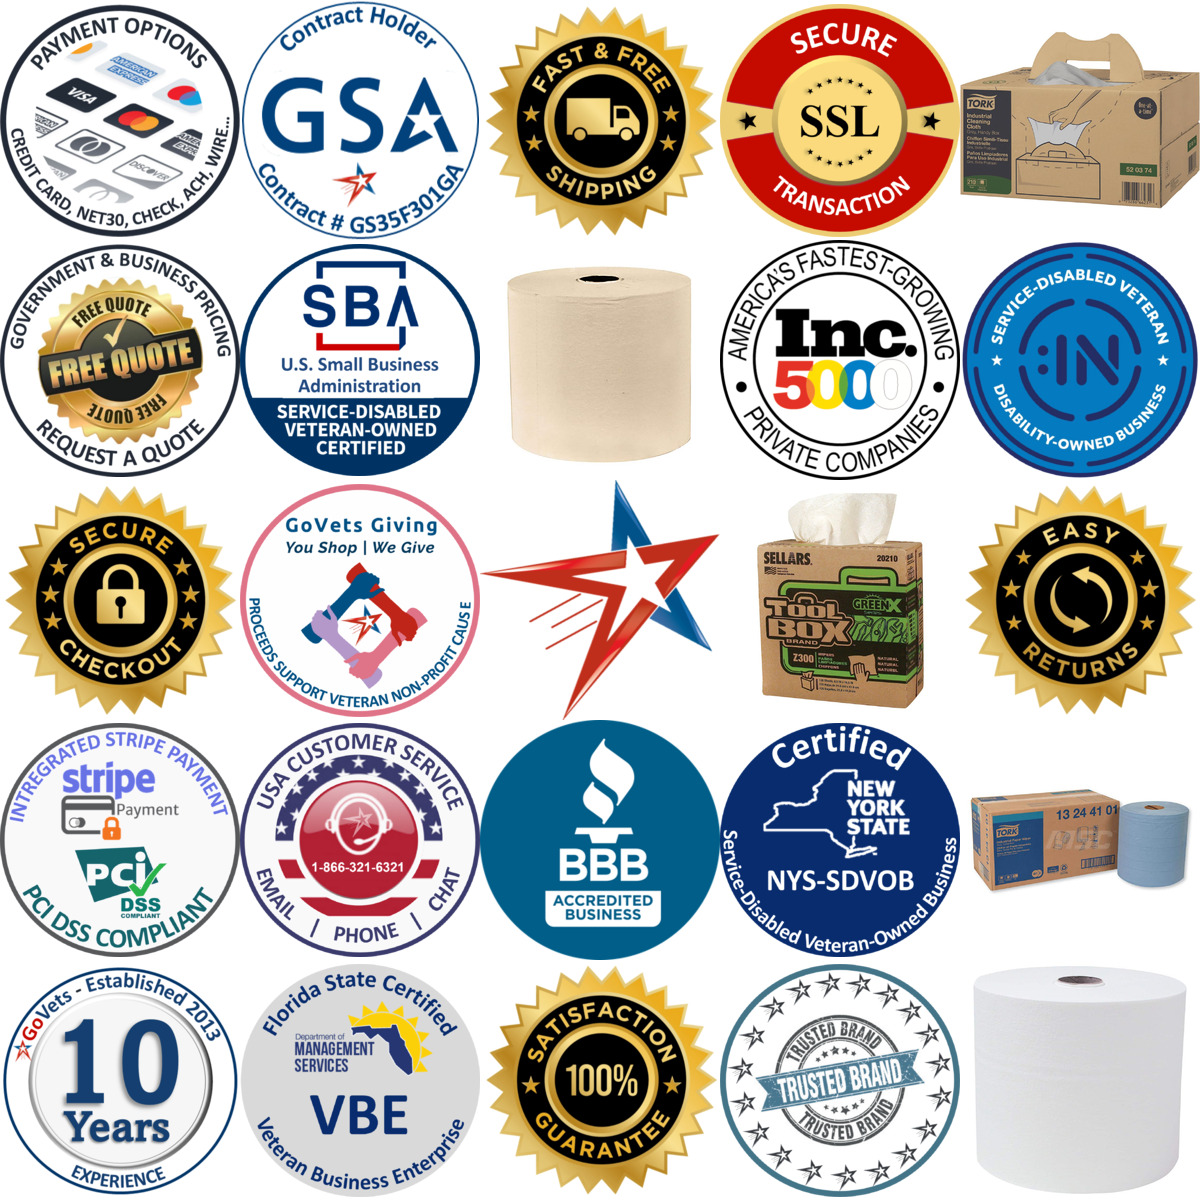 A selection of Paper Towels products on GoVets